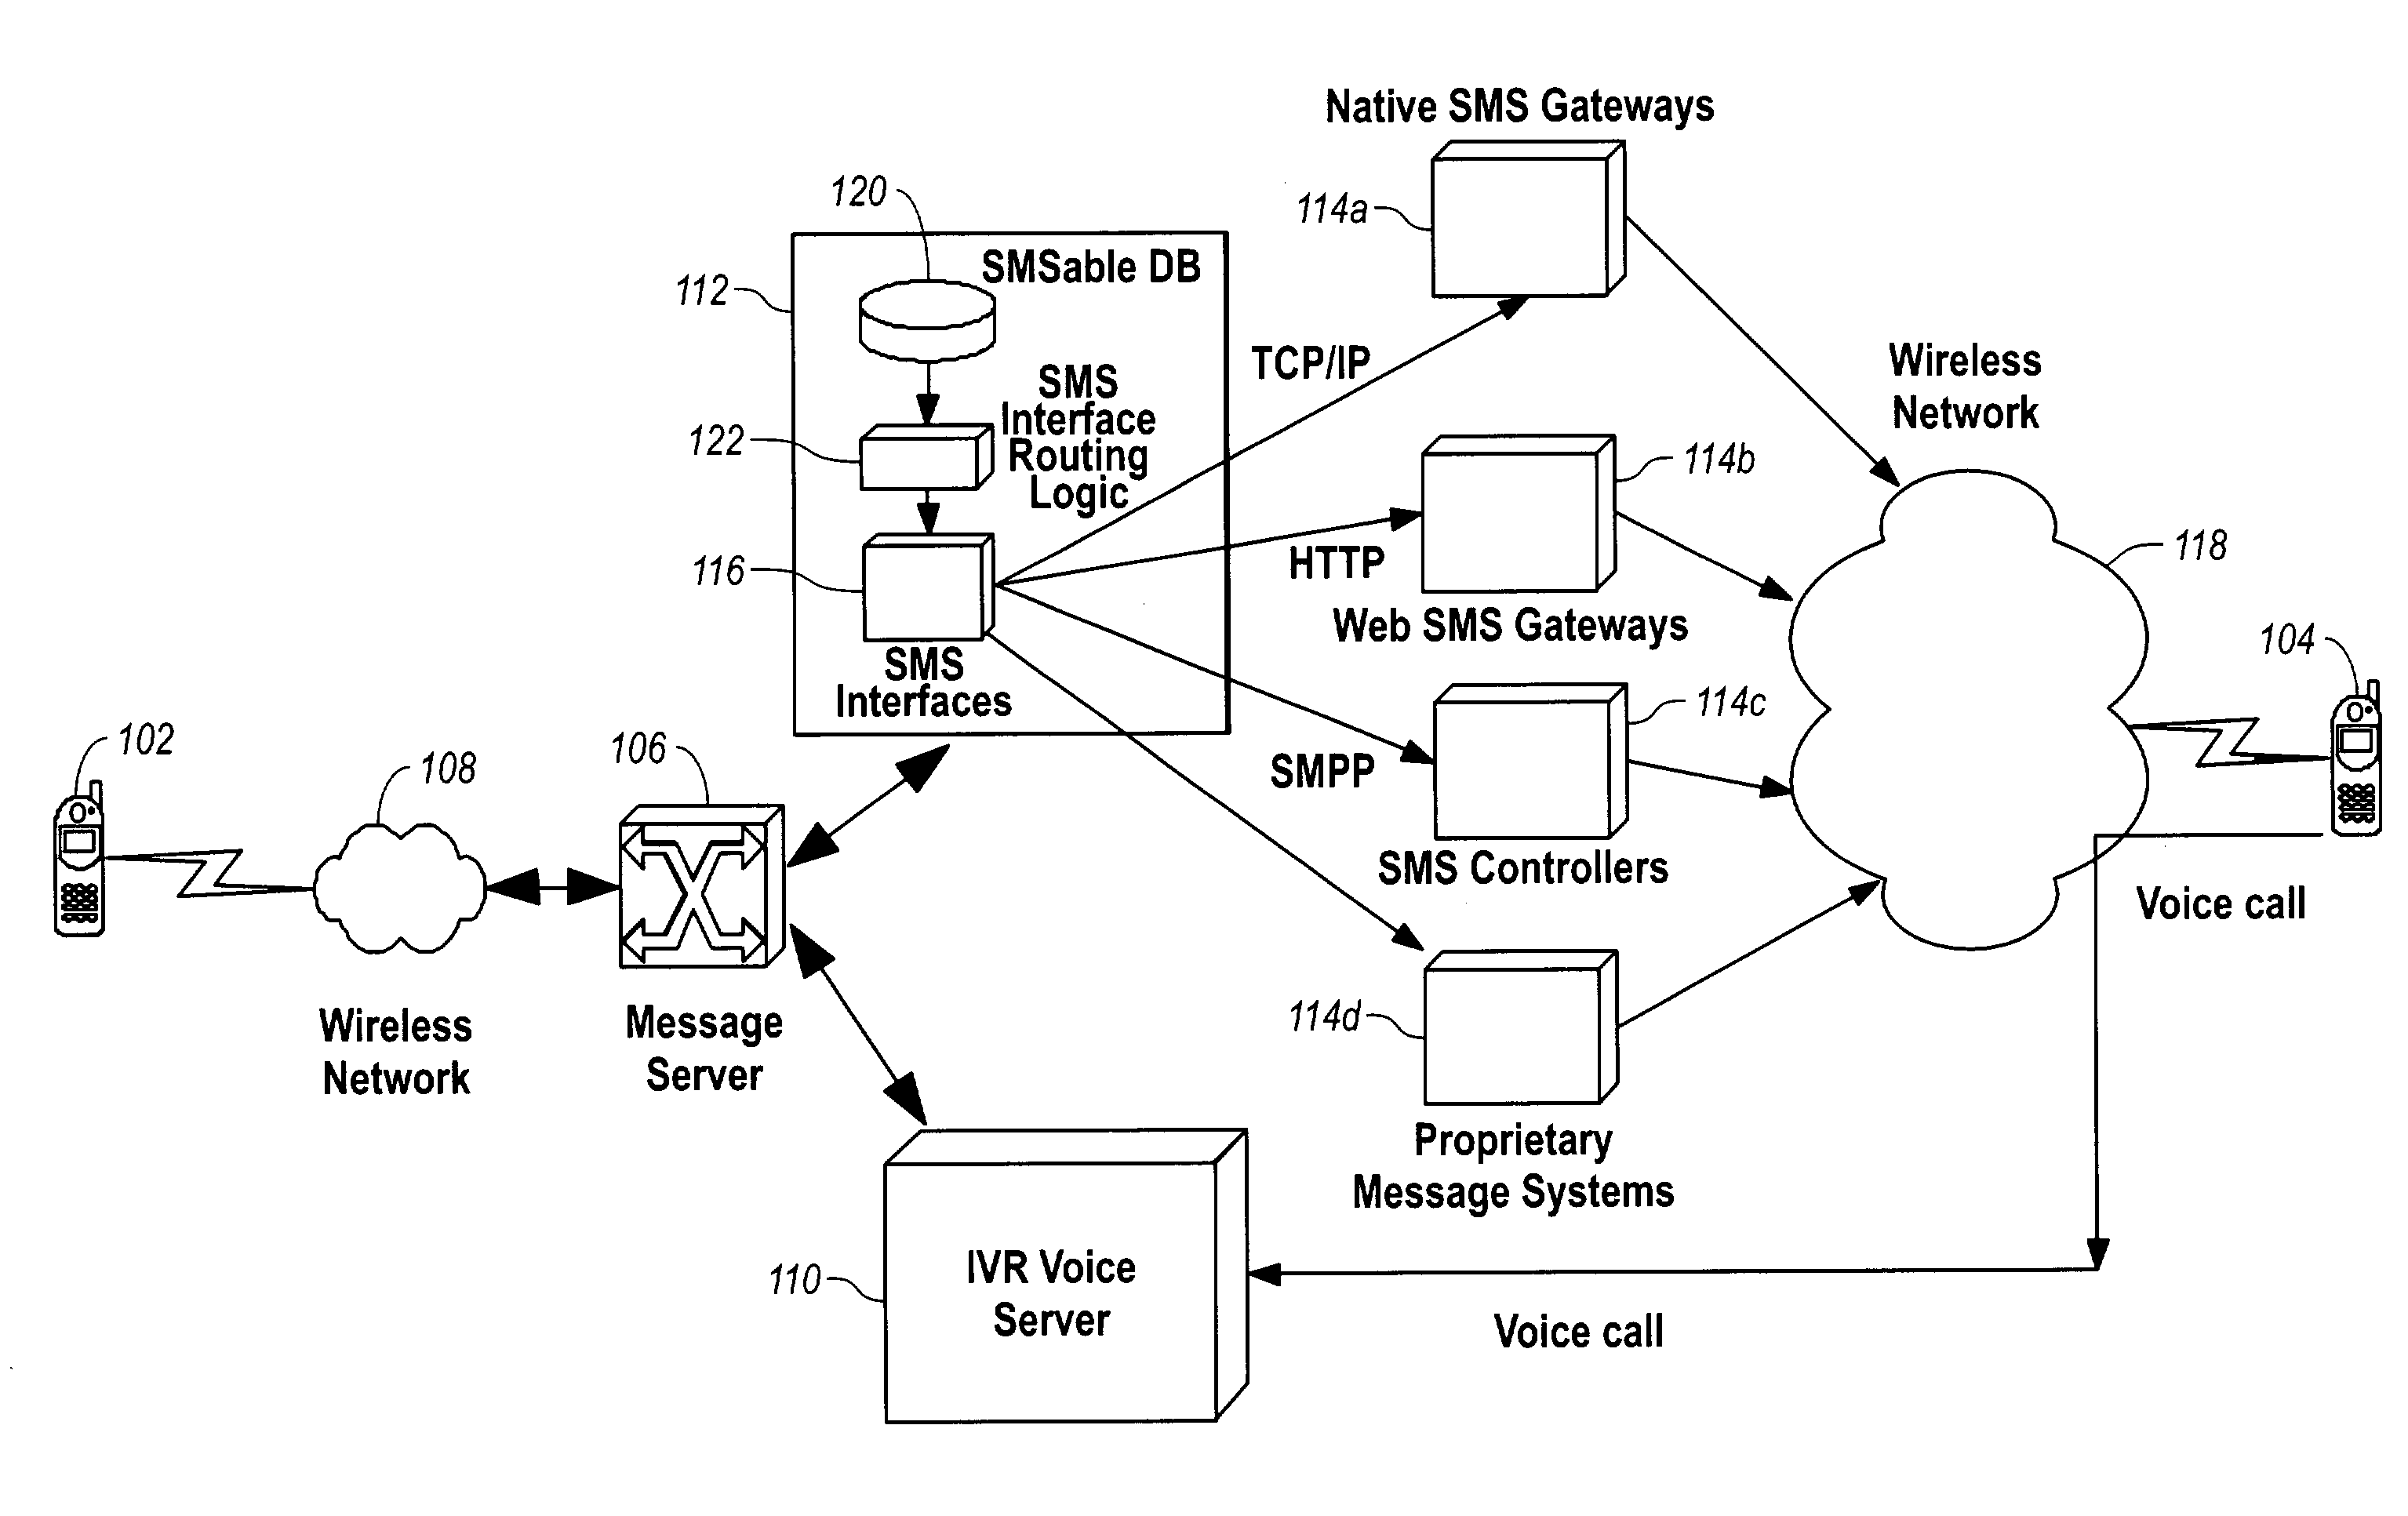 Delivery of an instant voice message in a wireless network using the SMS protocol